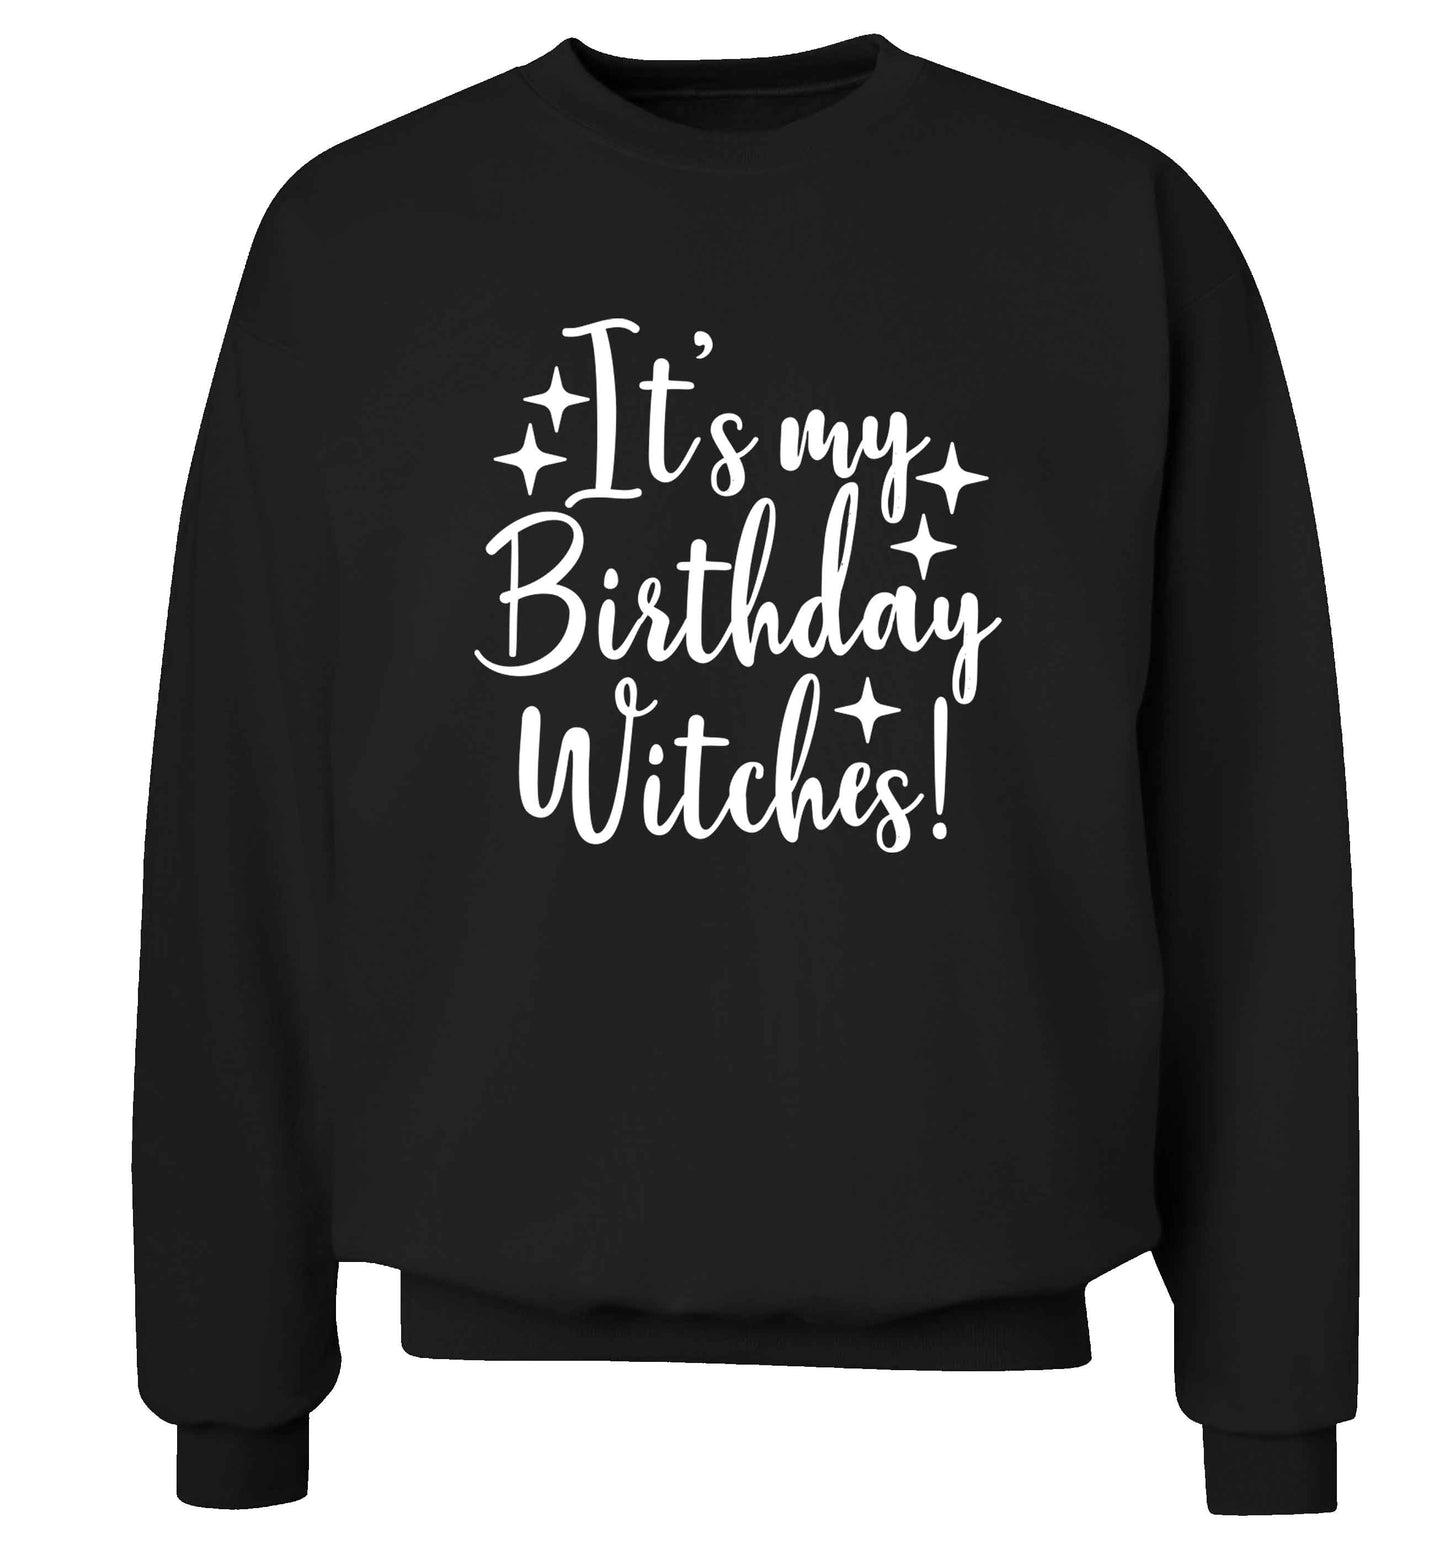 It's my birthday witches!adult's unisex black sweater 2XL